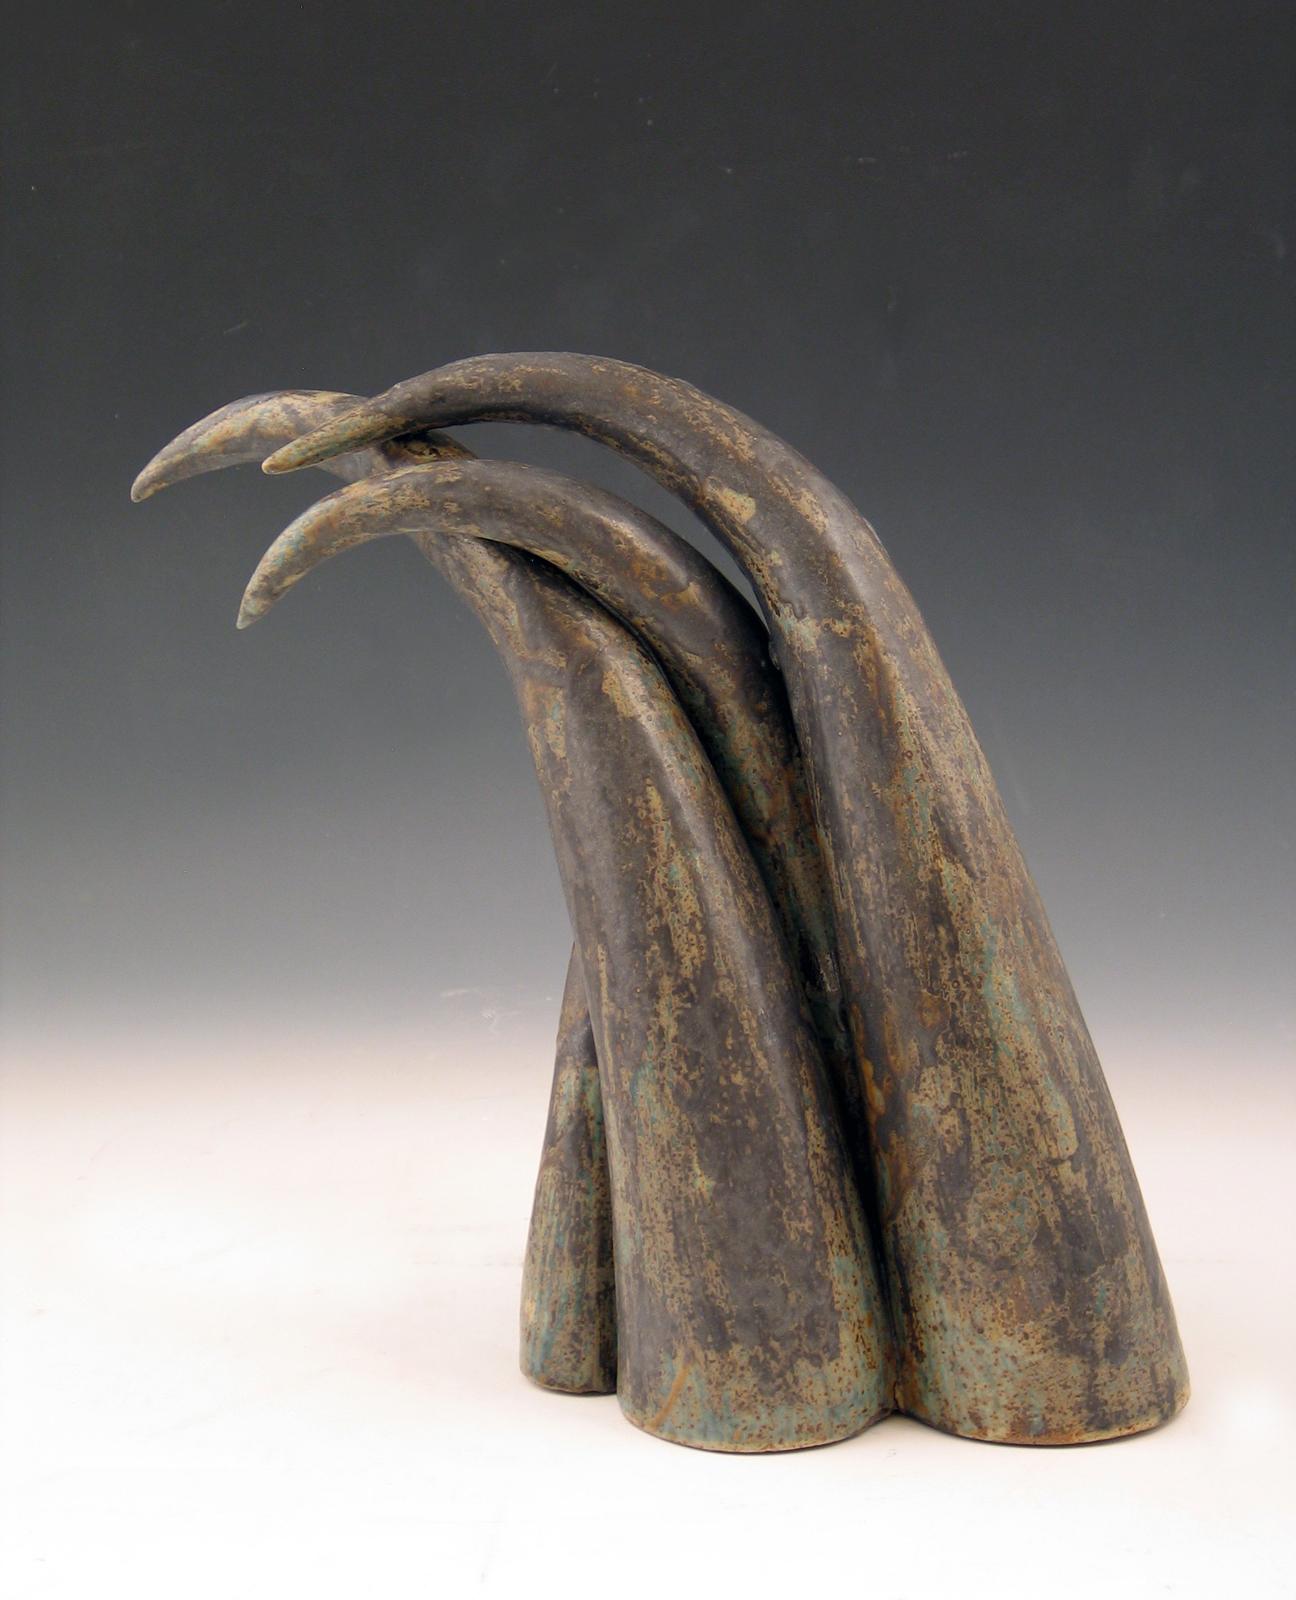 “Moving On”, sheaf of curved ceramic forms in deep browns - Black Abstract Sculpture by Elaine Lorenz